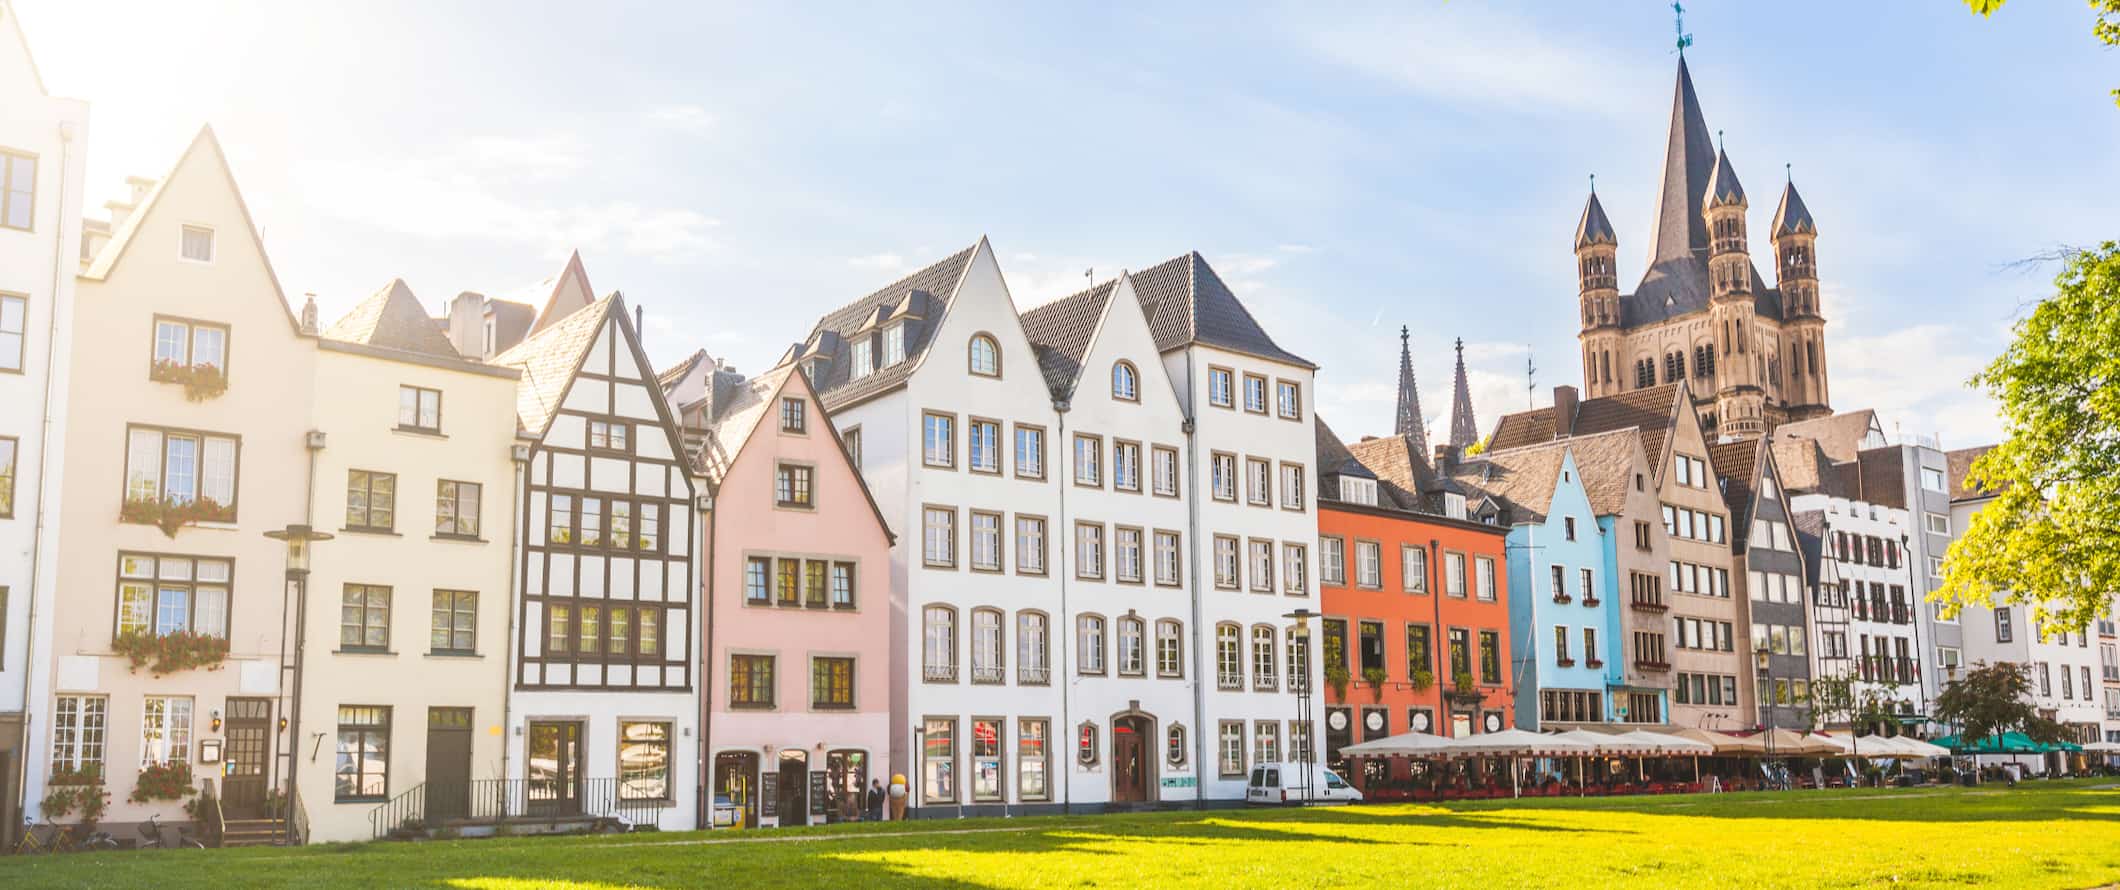 A row of colorful old houses in sunny Cologne, Germany